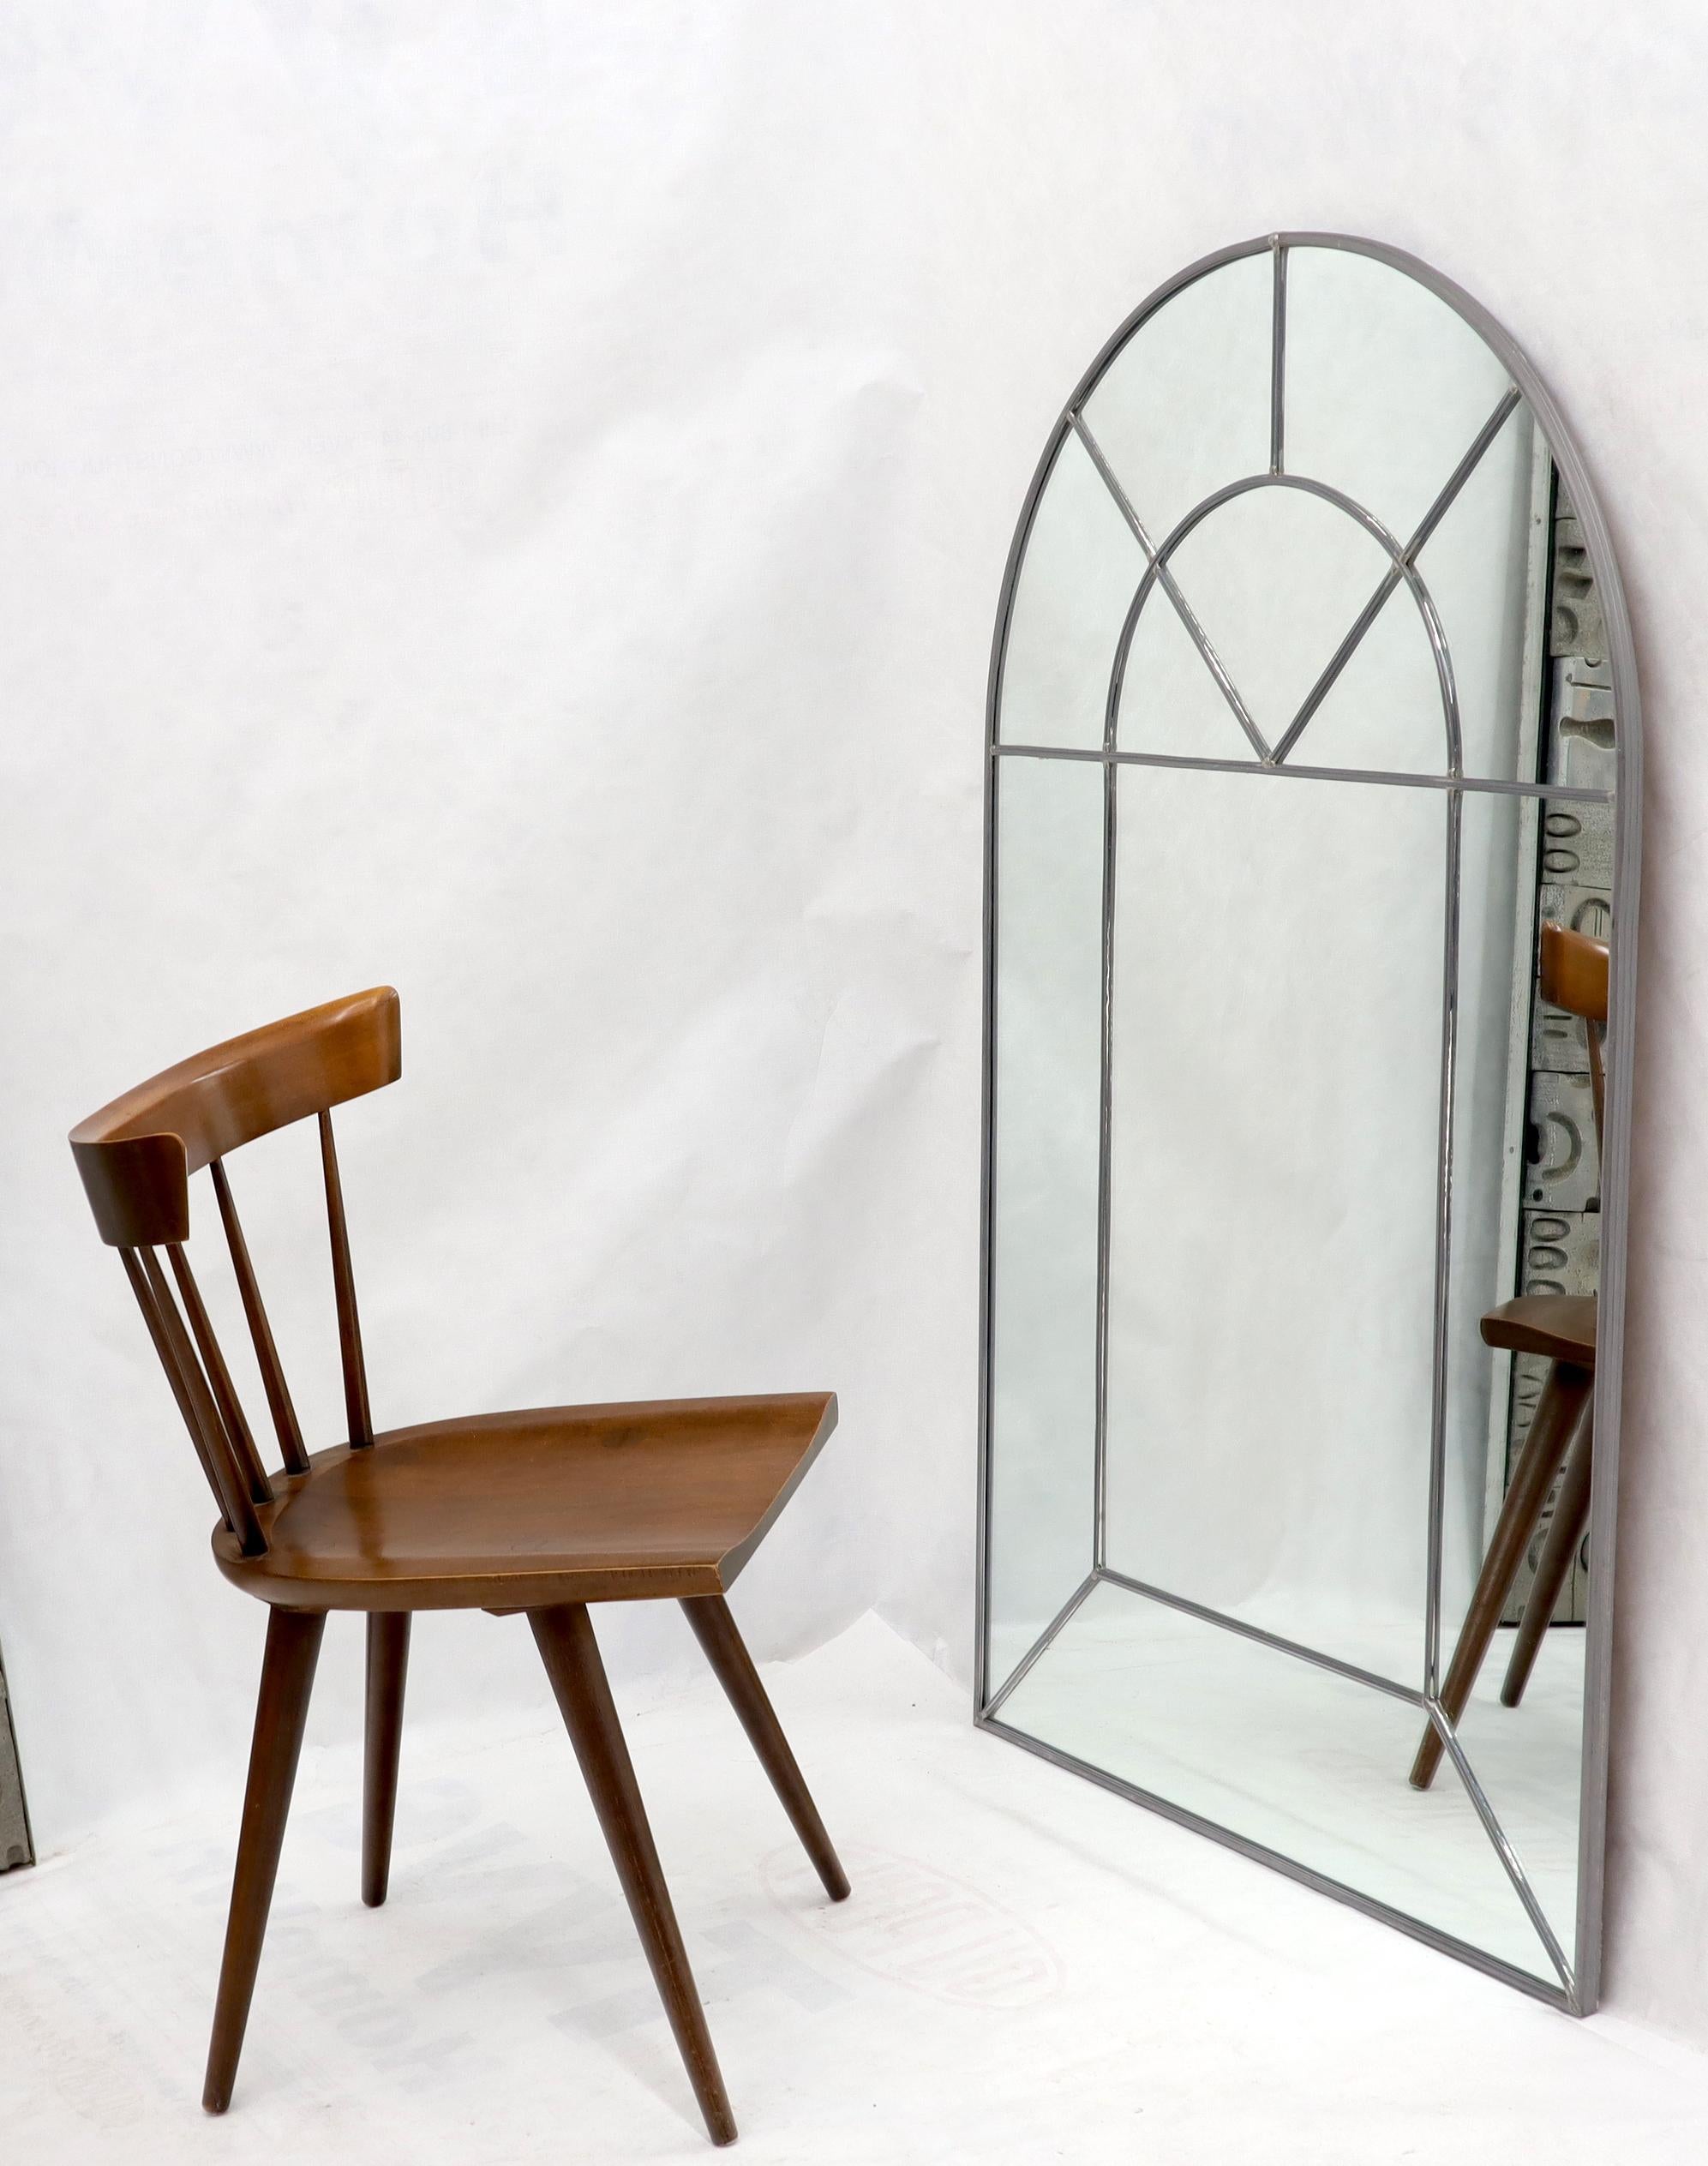 Large dome shape artist-signed Carol Canner and dated Mid-Century Modern era leaded glass wall mirror.